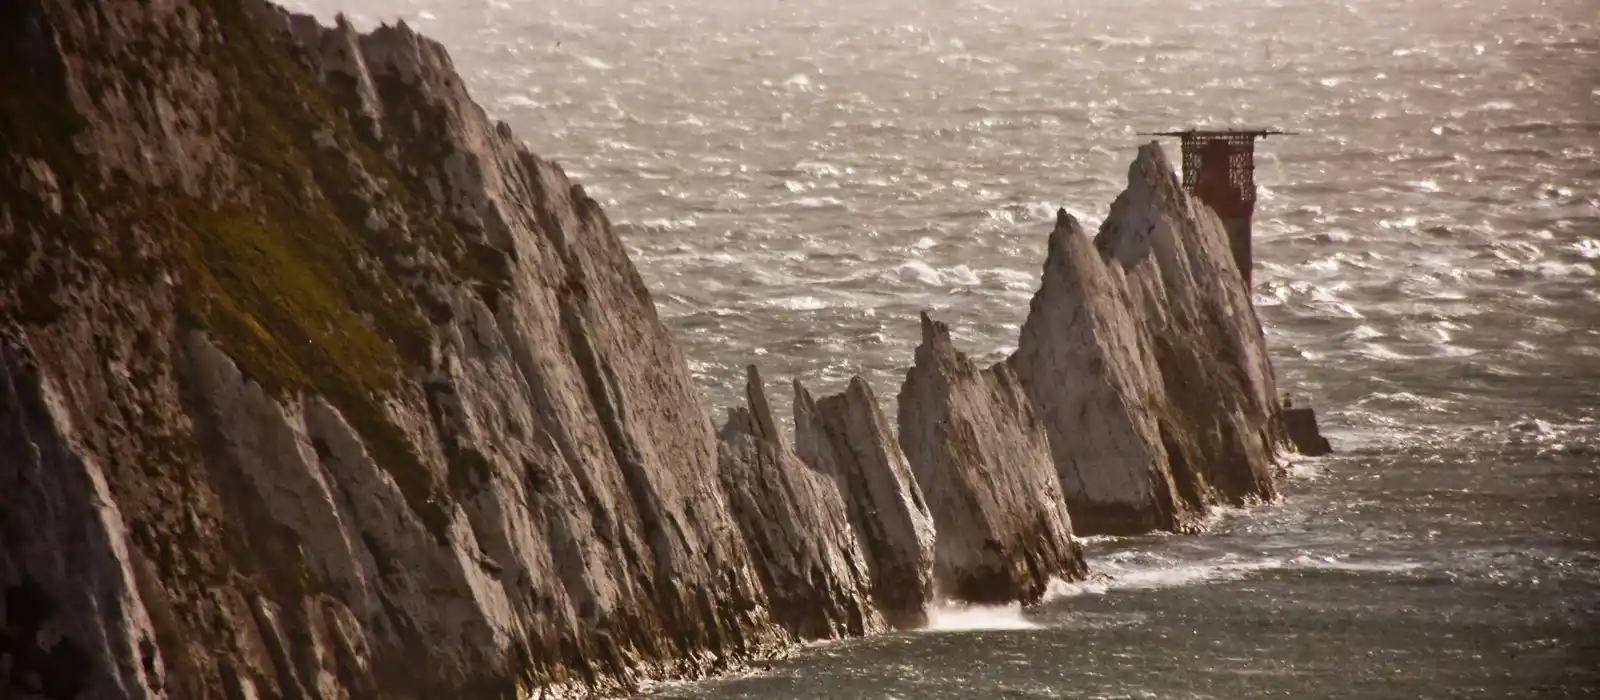 The Needles on the Isle of Wight